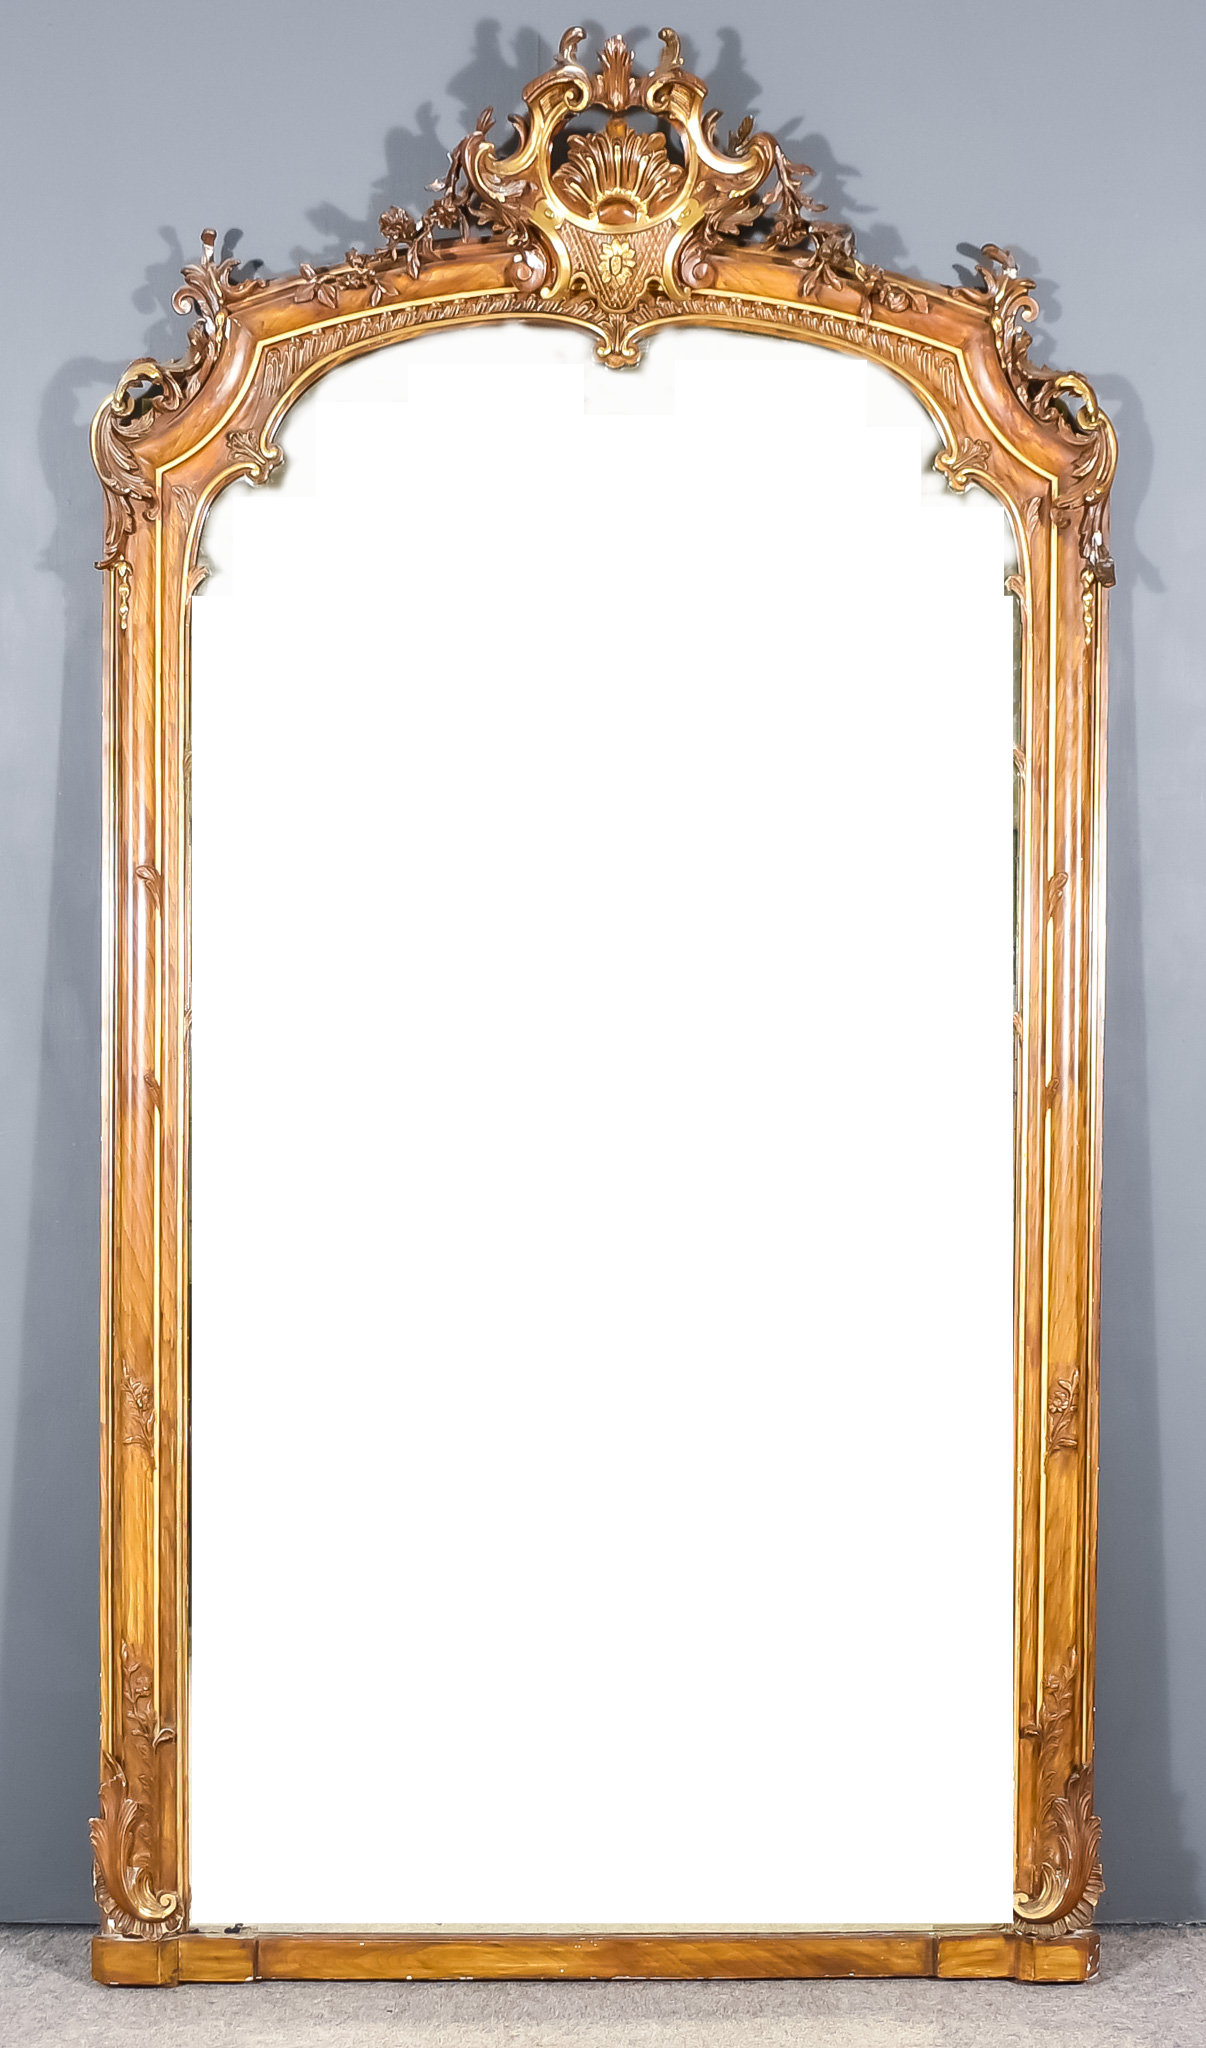 A 19th Century Wood Effect and Gilt Framed Rectangular Overmantle Mirror, with leaf and floral